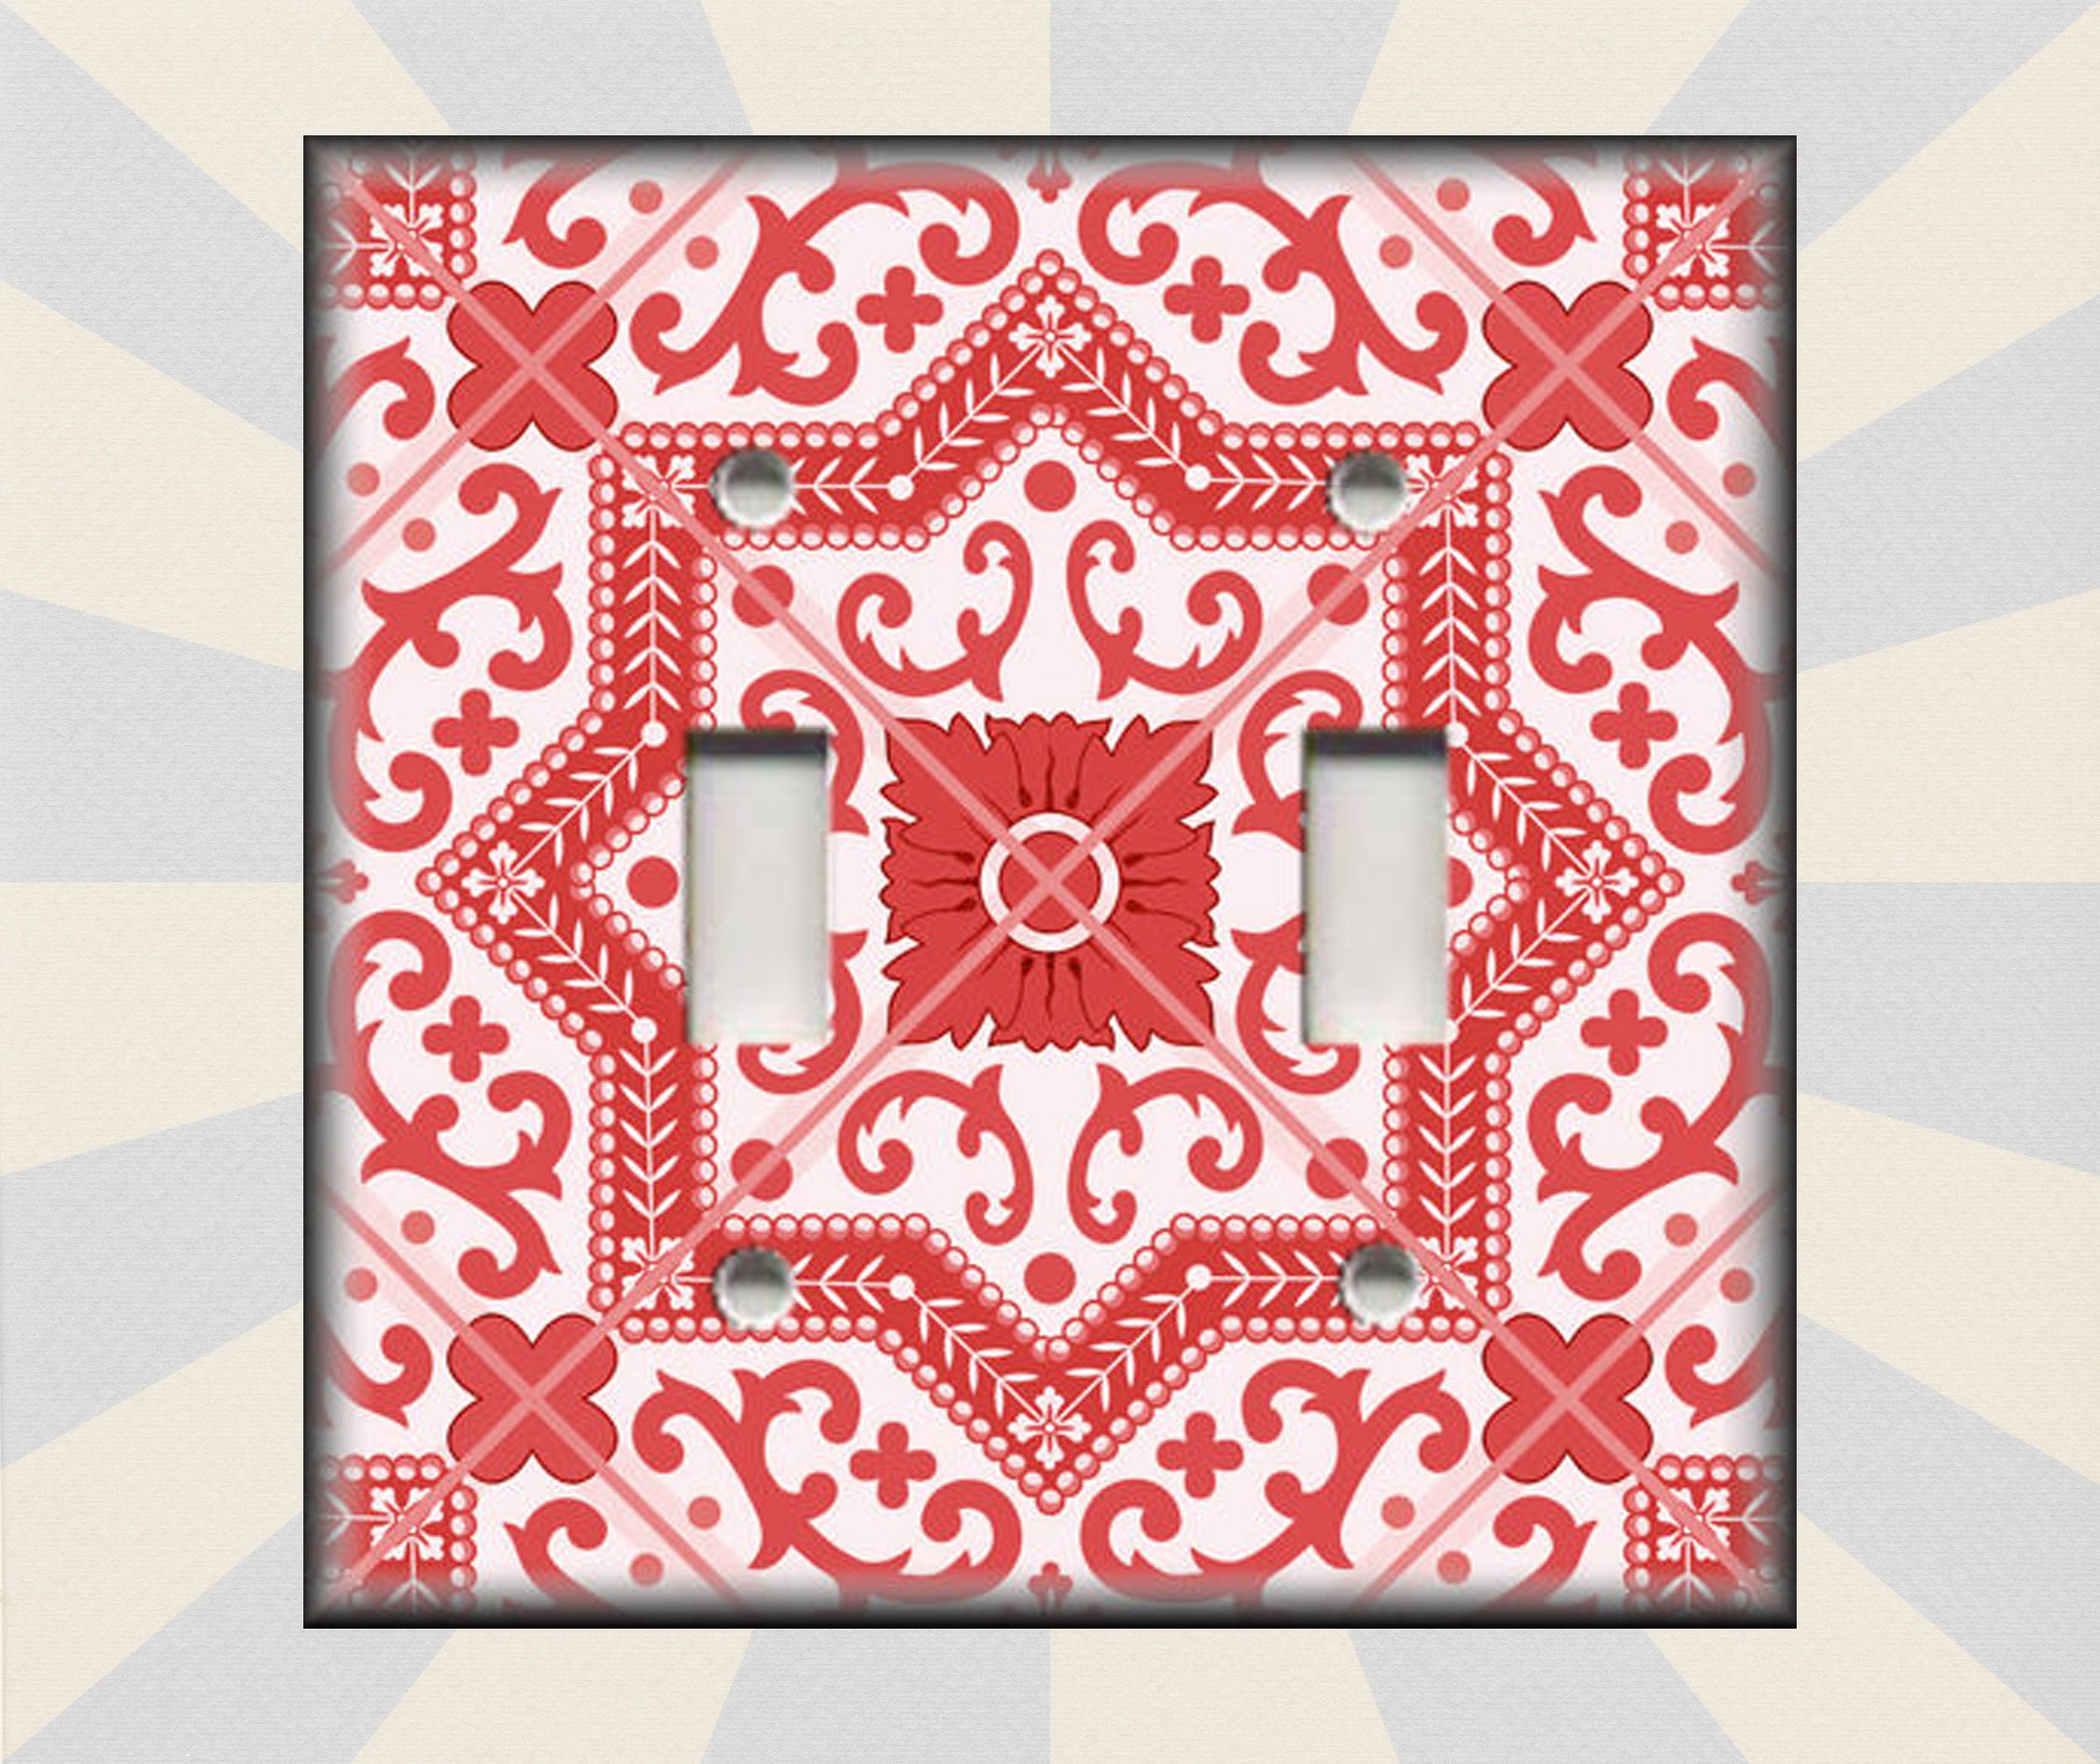 Light Switch Plate Cover Global Home Decor Decorative Tile Design Dark Red 